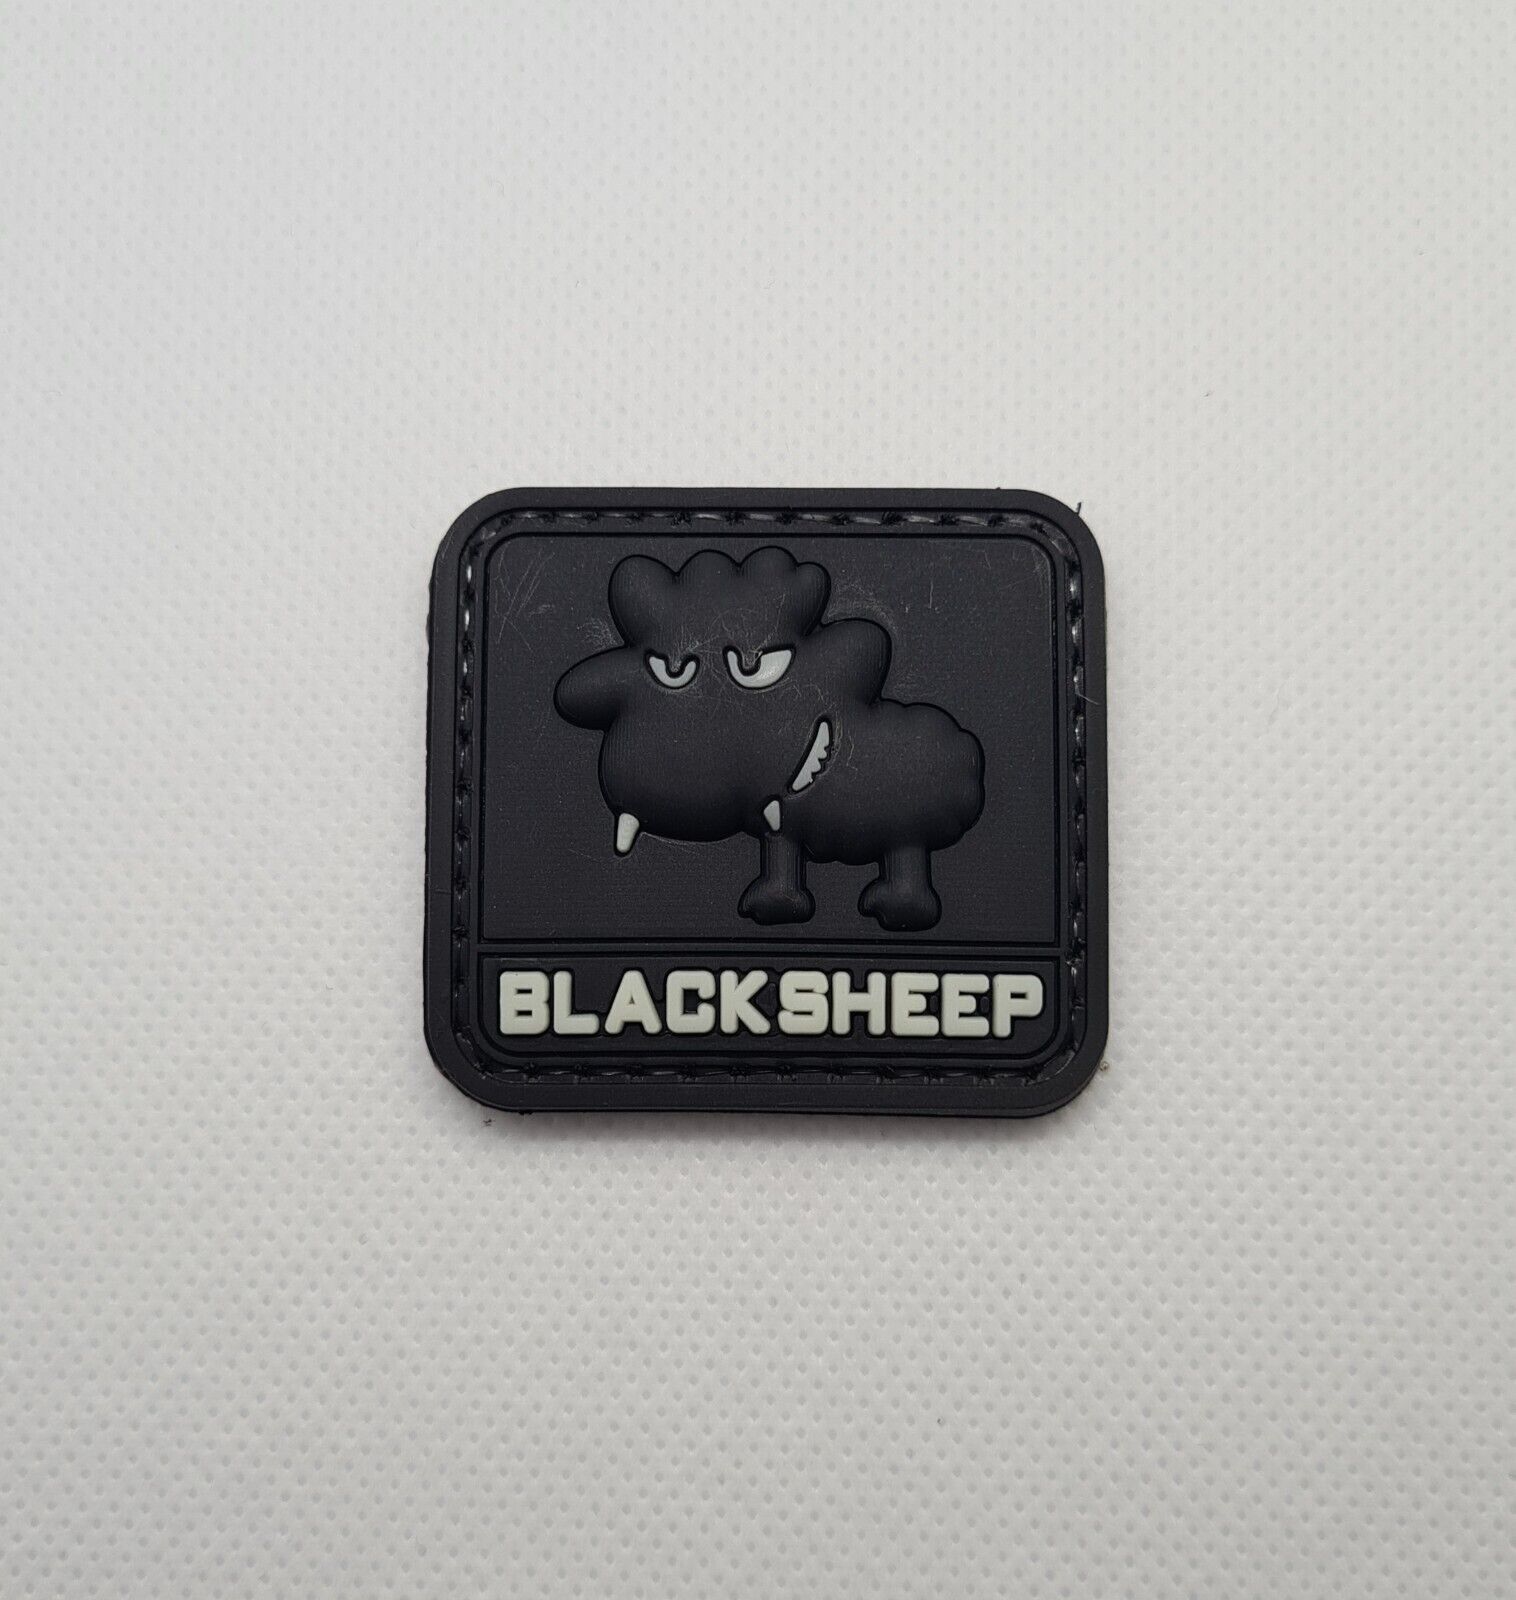 Black Sheep Warrior 3D PVC Tactical Morale Patch – Hook Backed